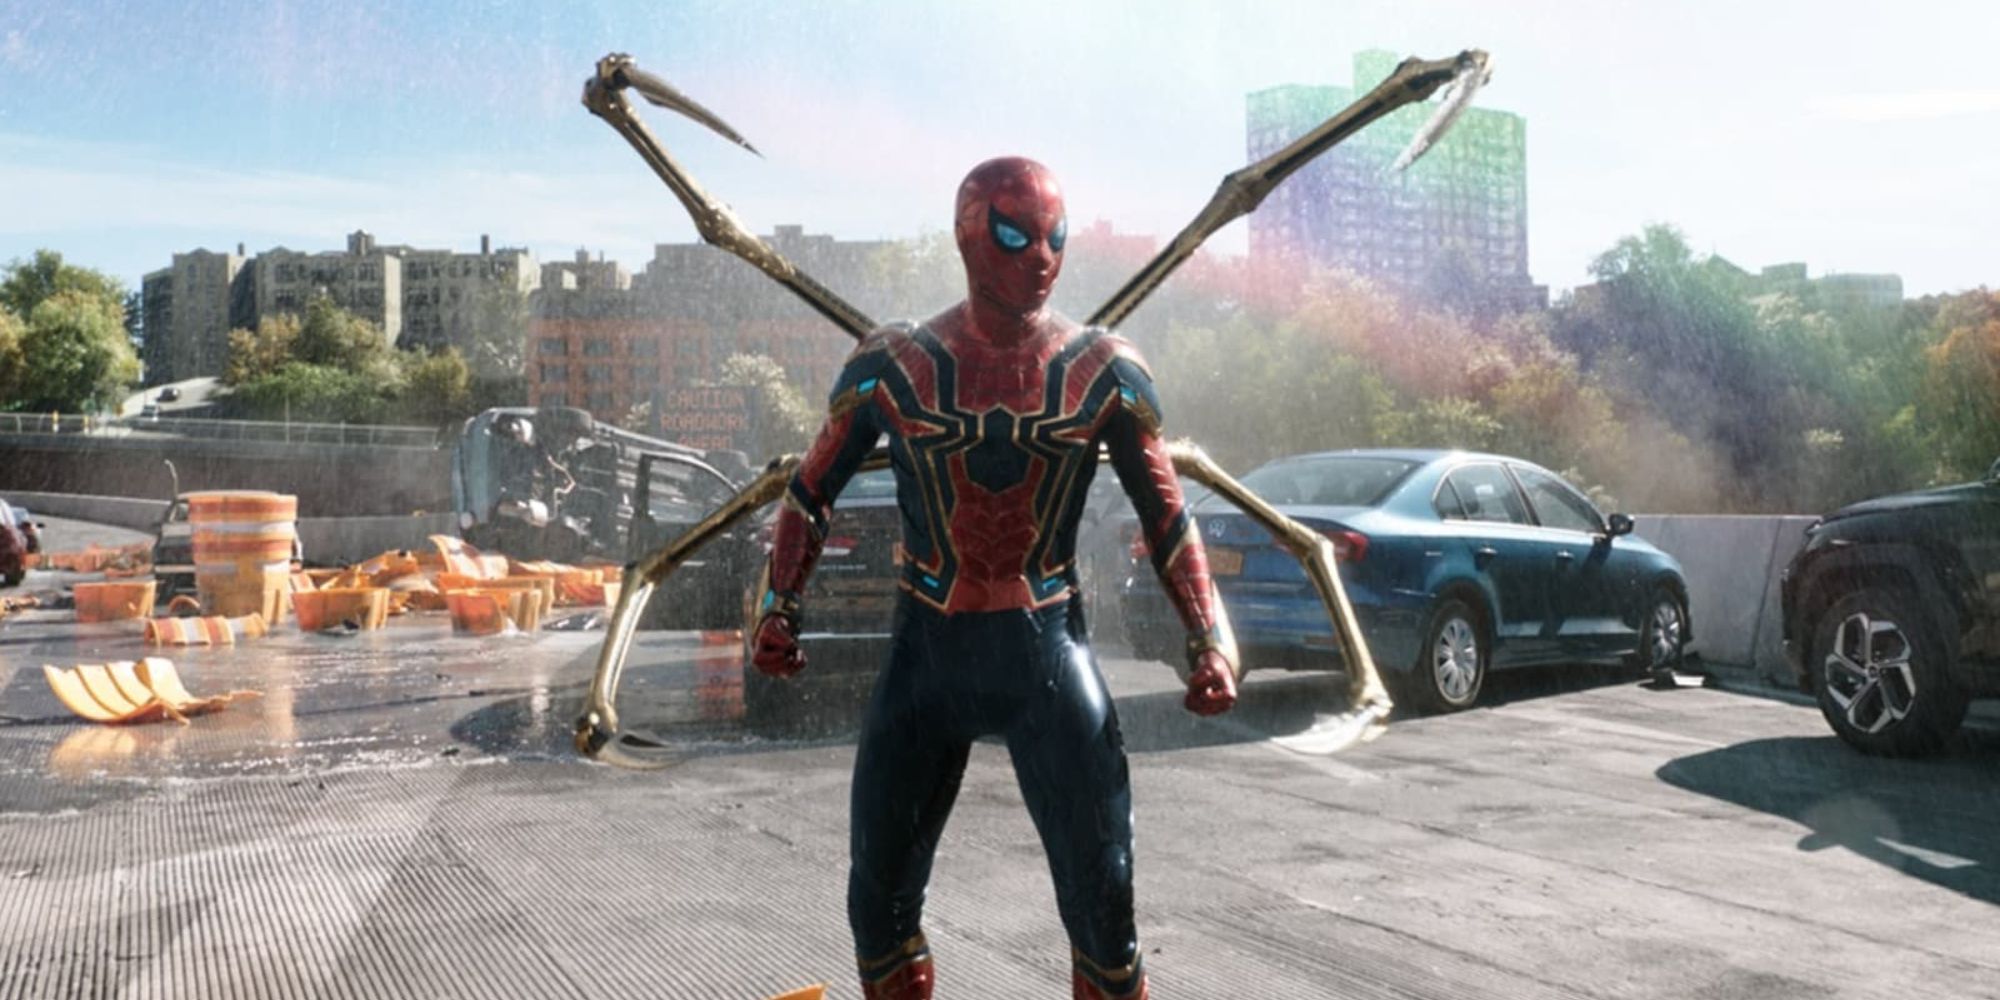 A screengrab of Tom Holland's Spider-Man in Spider-Man: No Way Home.